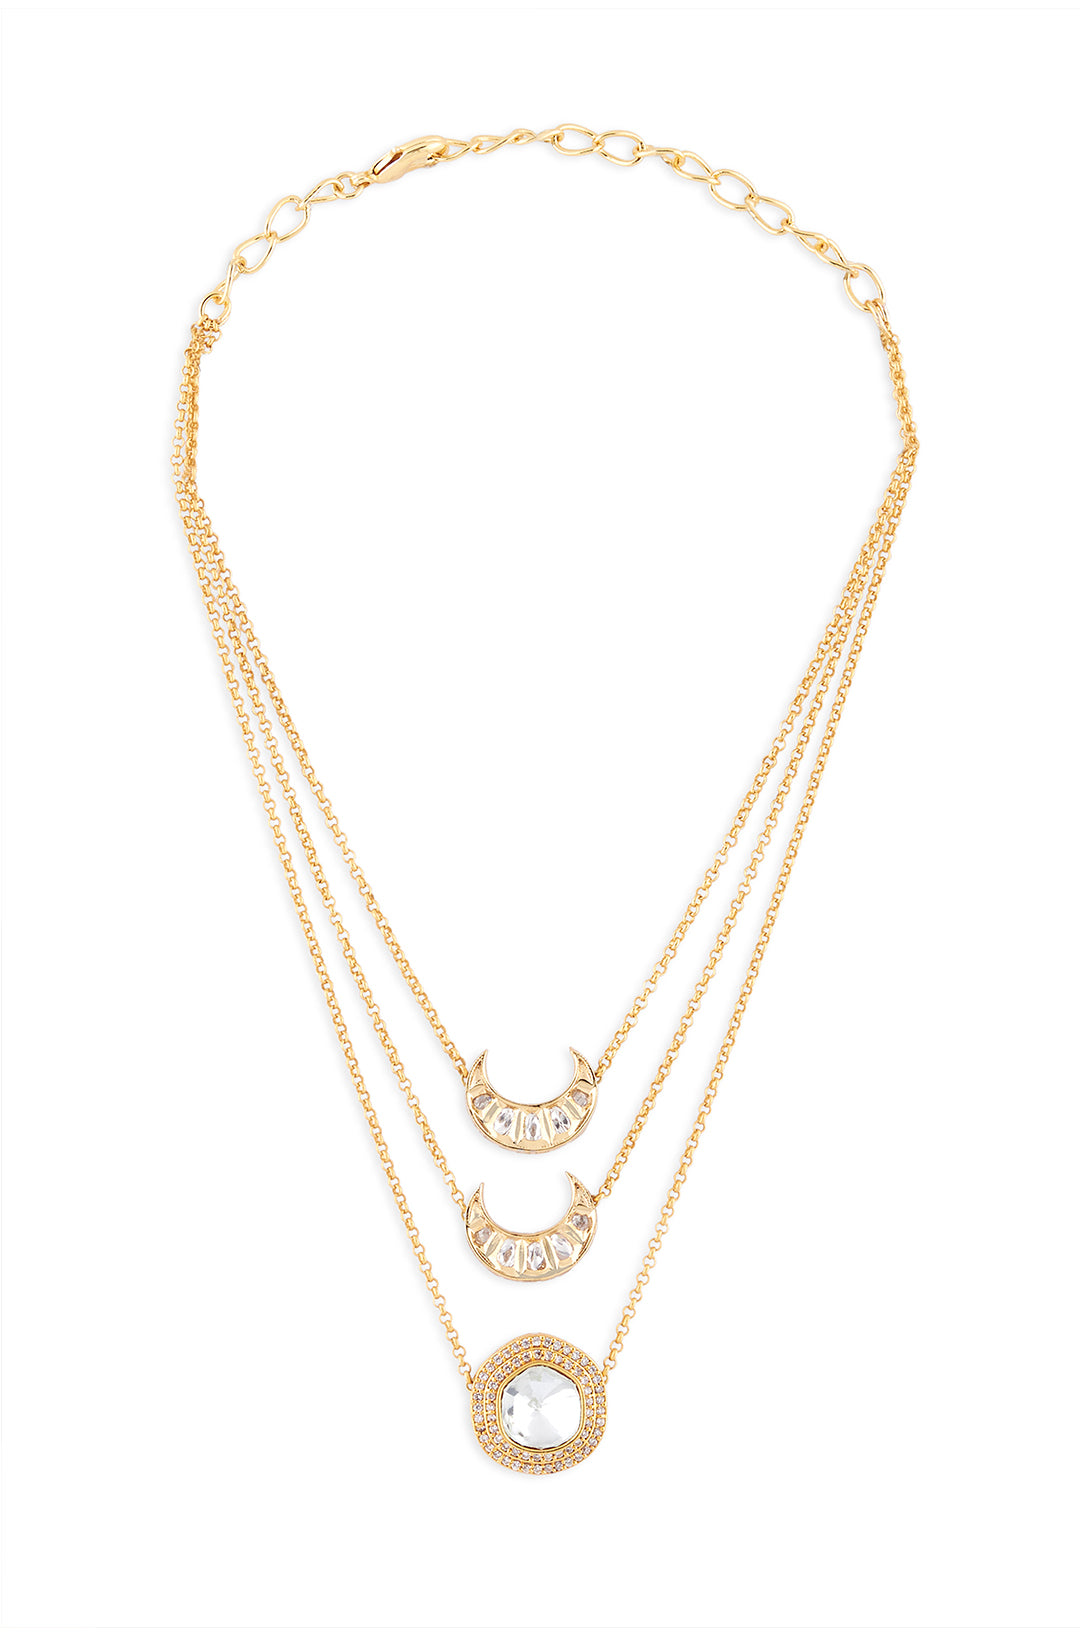 Load image into Gallery viewer, Mozanite Polki Necklace In Gold Tone - Joules by Radhika
